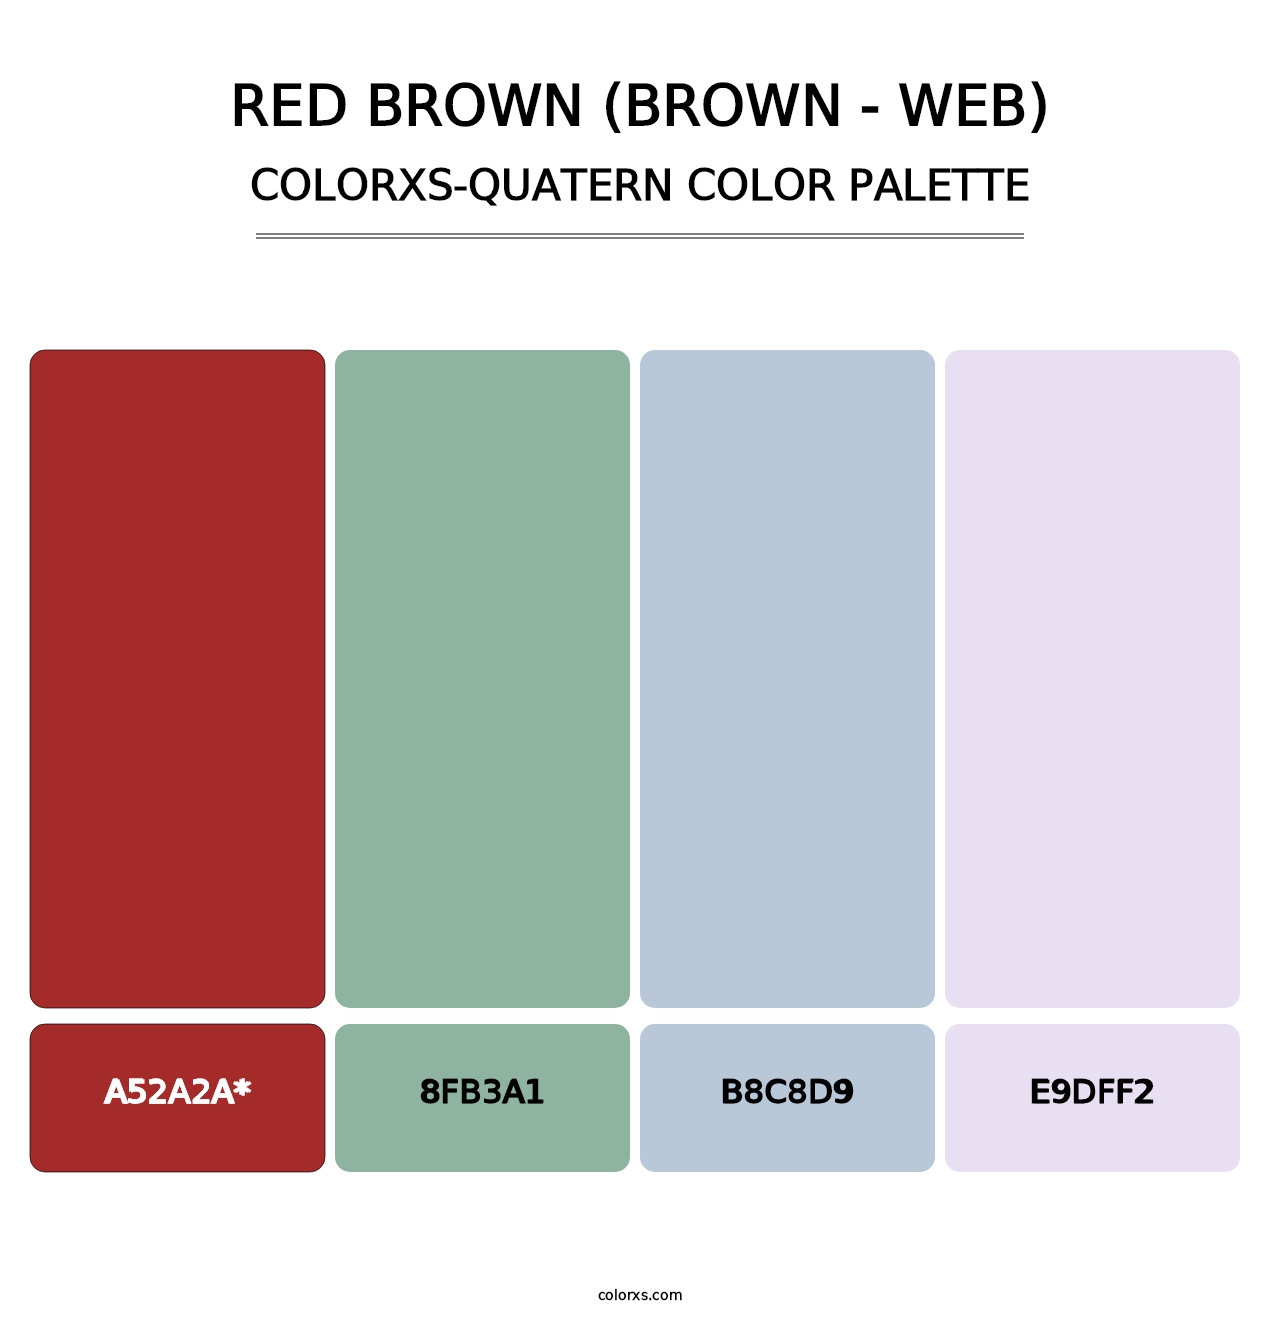 Red Brown (Brown - Web) - Colorxs Quatern Palette